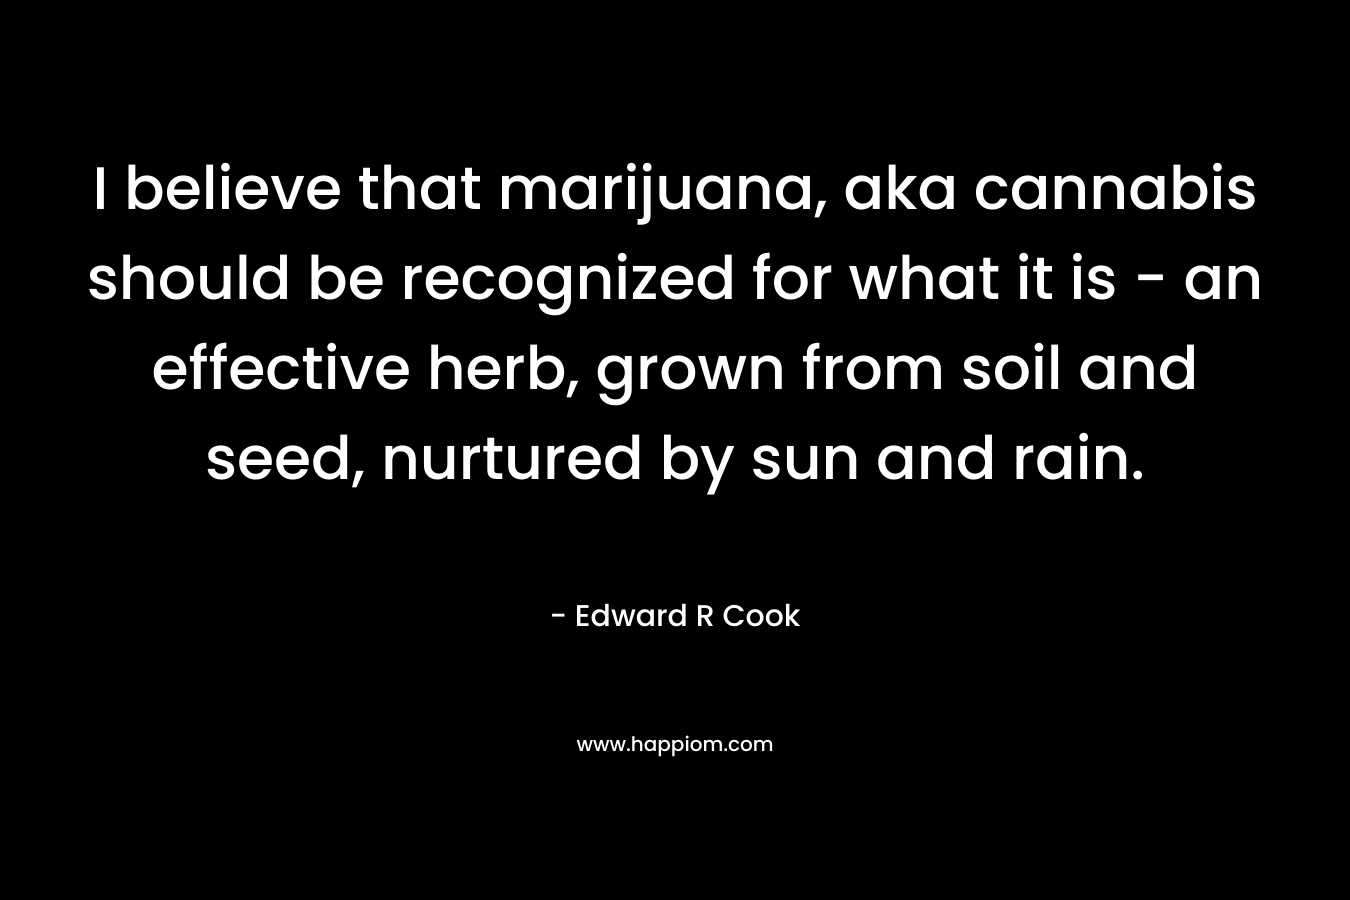 I believe that marijuana, aka cannabis should be recognized for what it is - an effective herb, grown from soil and seed, nurtured by sun and rain.